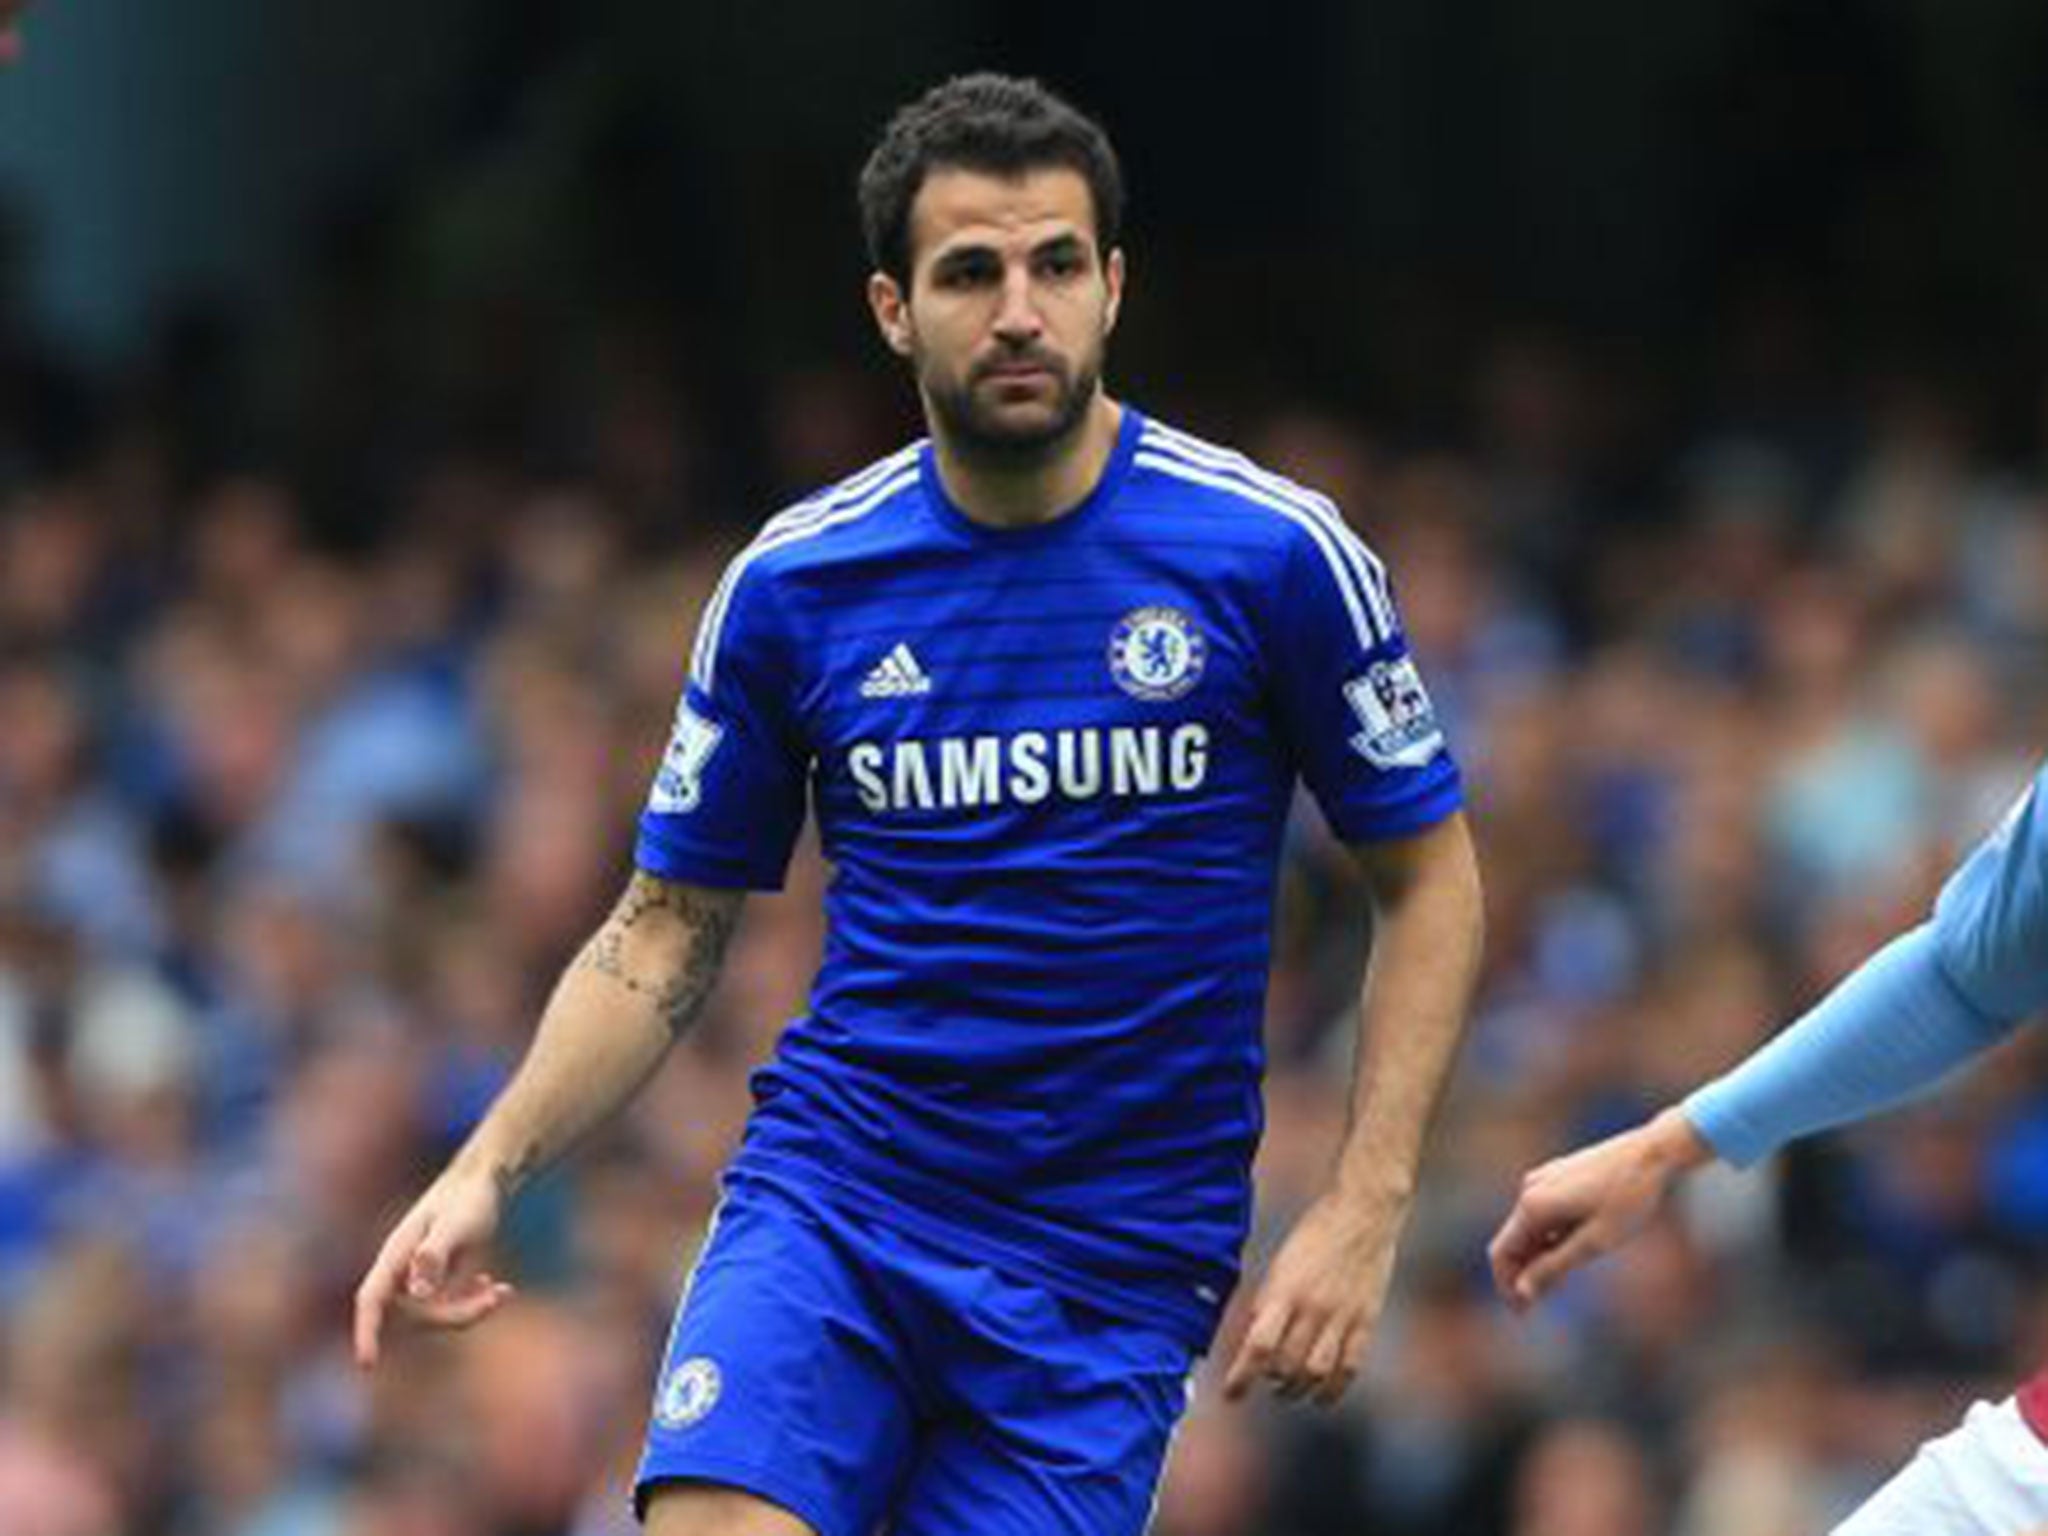 Midfielder Cesc Fabregas has proved the model professional since joining Chelsea (PA)